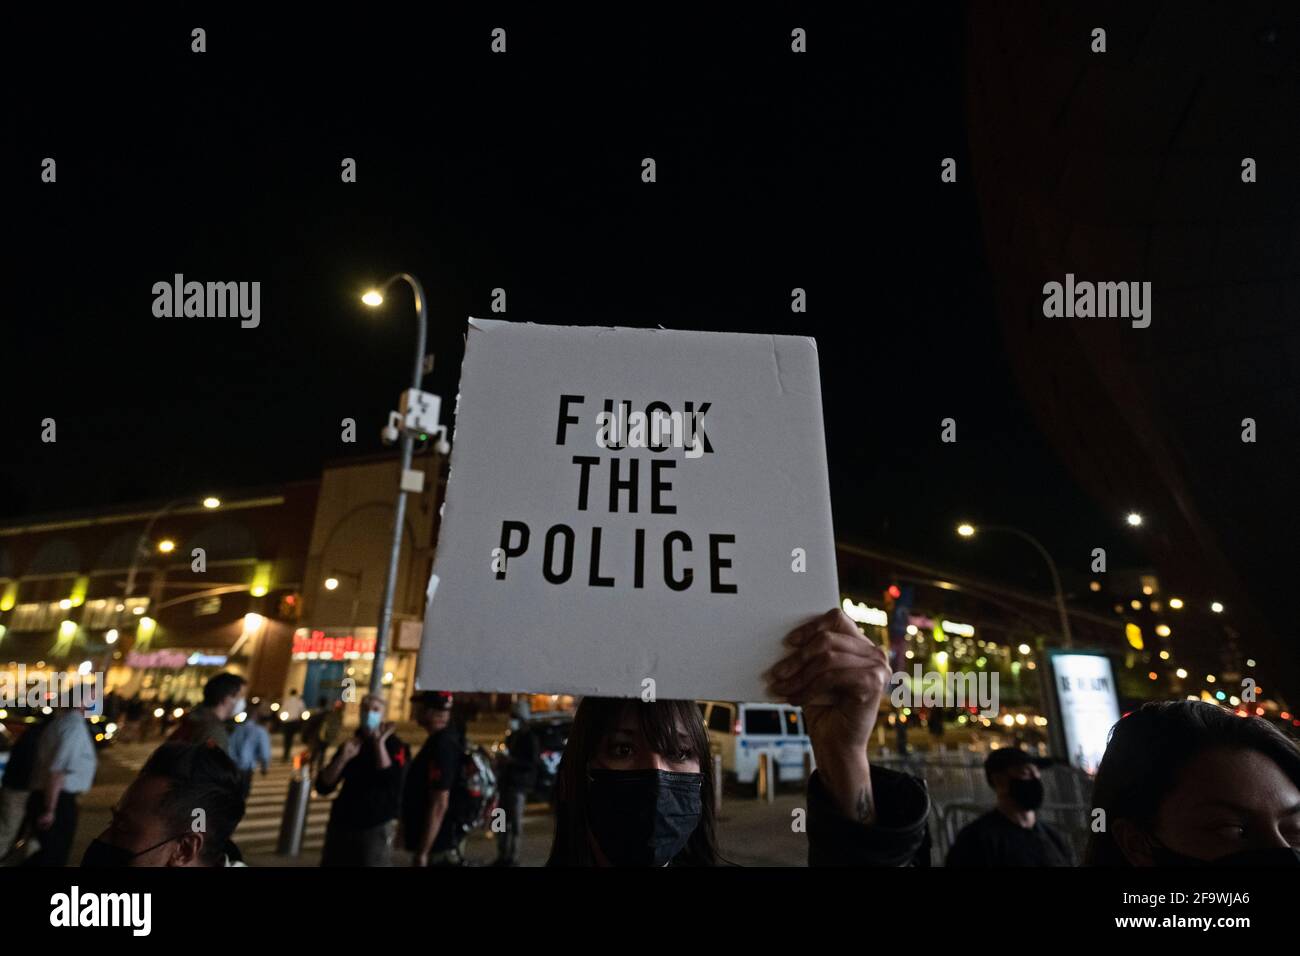 Brooklyn, New York, USA 20 Apr 2021. Woman holds anti-police sign as protesters gather at Barclays Center hours after a jury found former Minneapolis police officer Derek Chauvin guilty of murdering George Floyd in 2020. Stock Photo